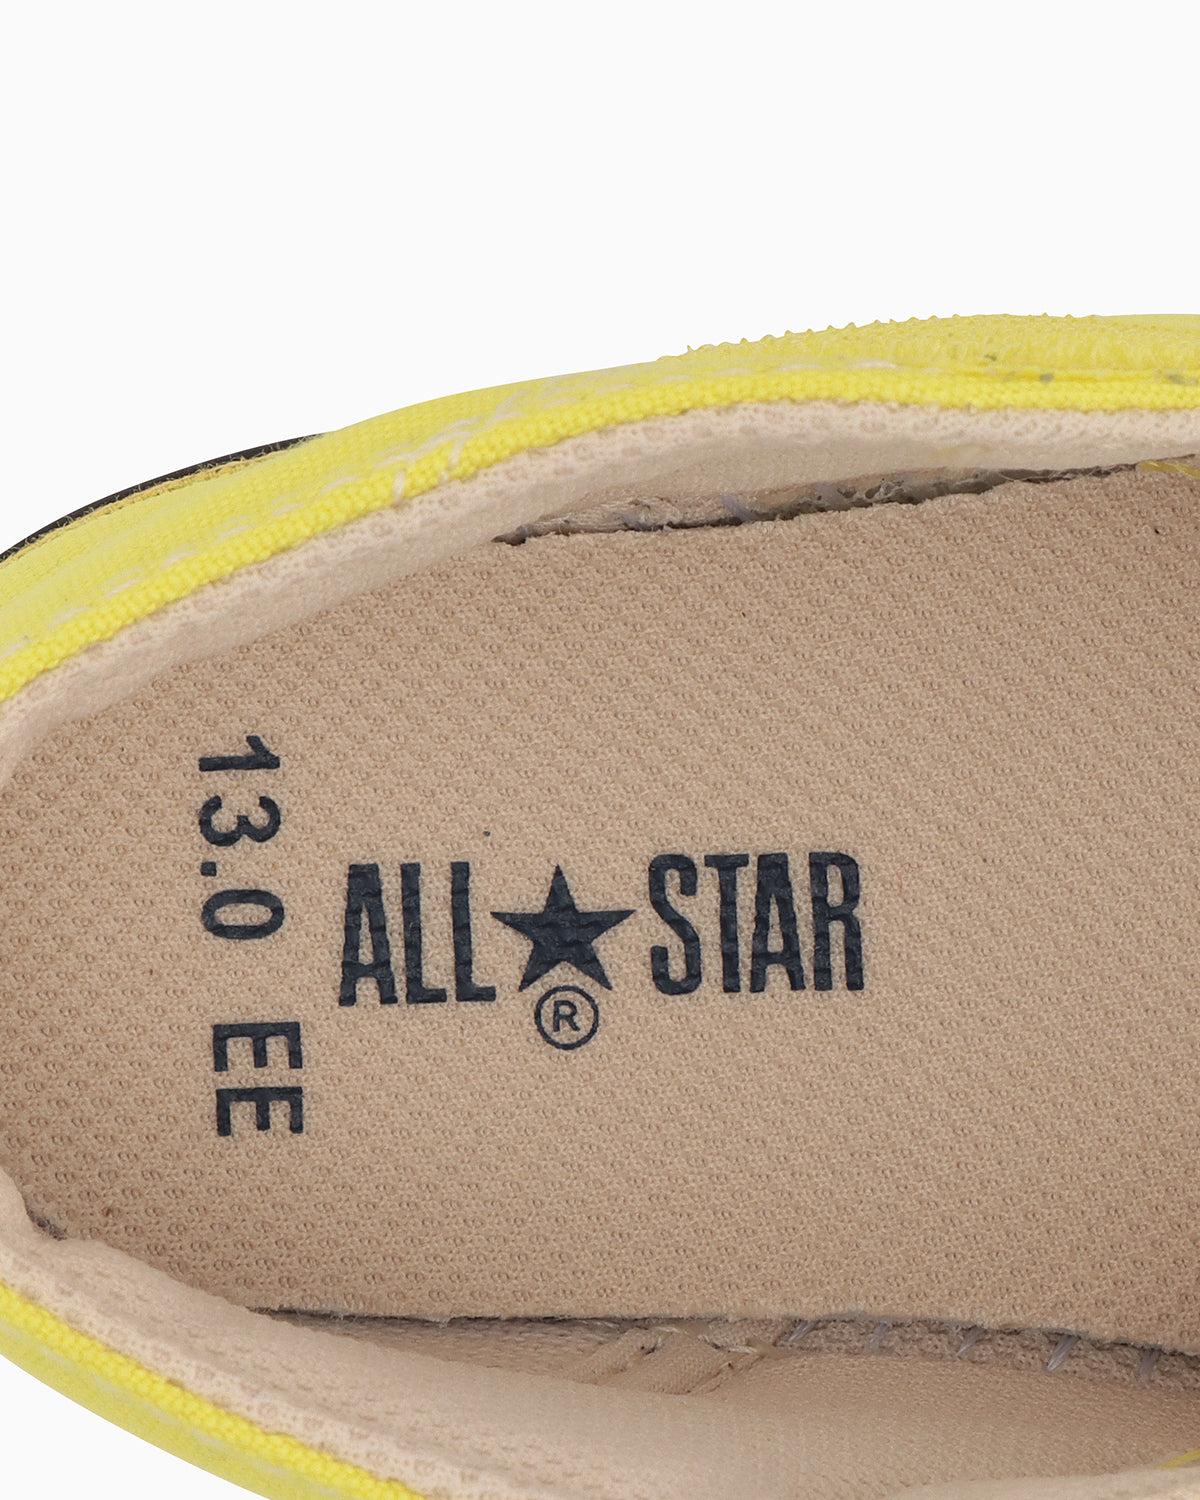 BABY ALL STAR N NEONCOLORS OF V-1